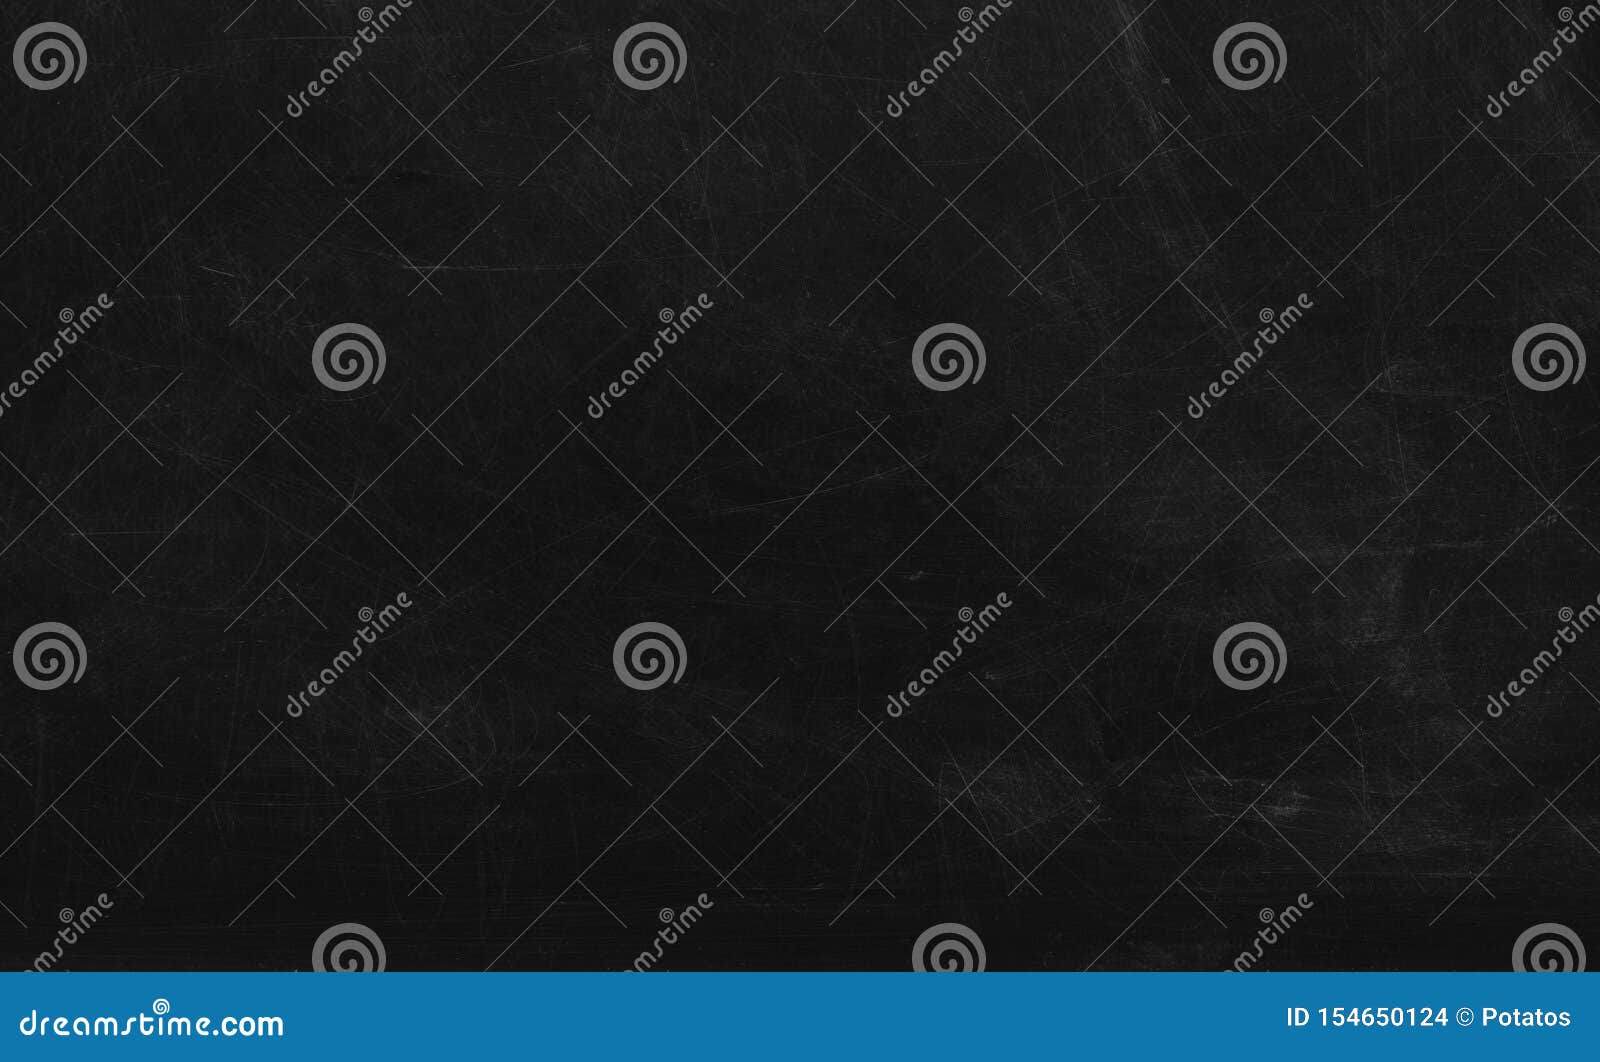 black chalk board texture background.  chalkboard, blackboard, school board  surface with scratches and chalk traces